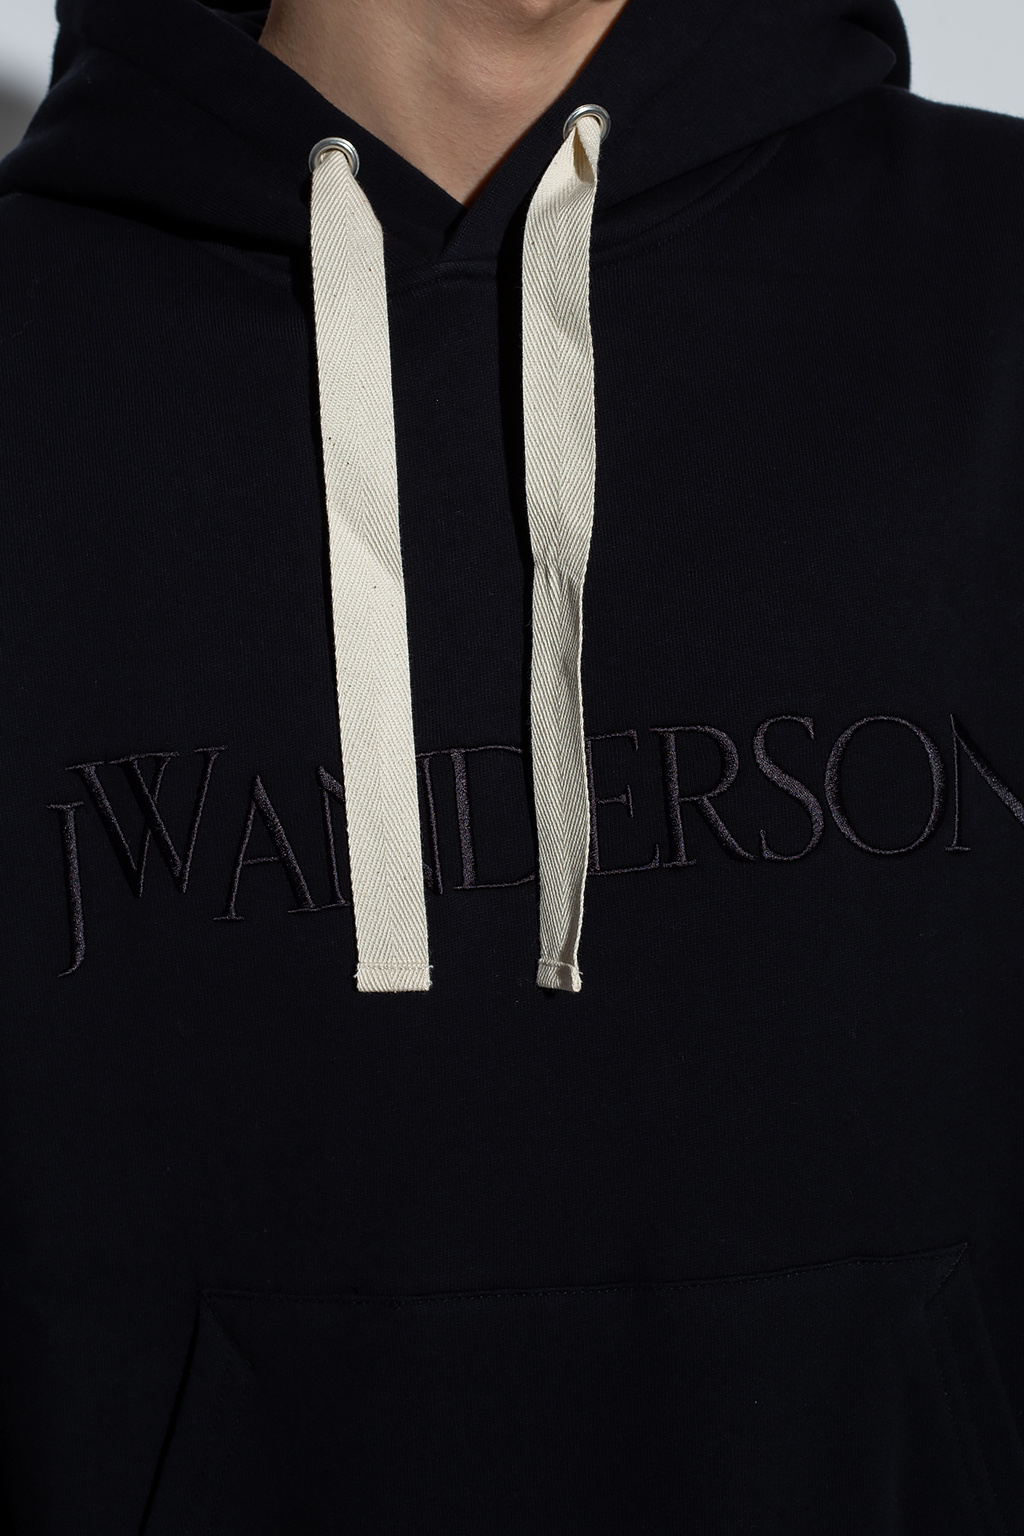 JW Anderson Add to bag